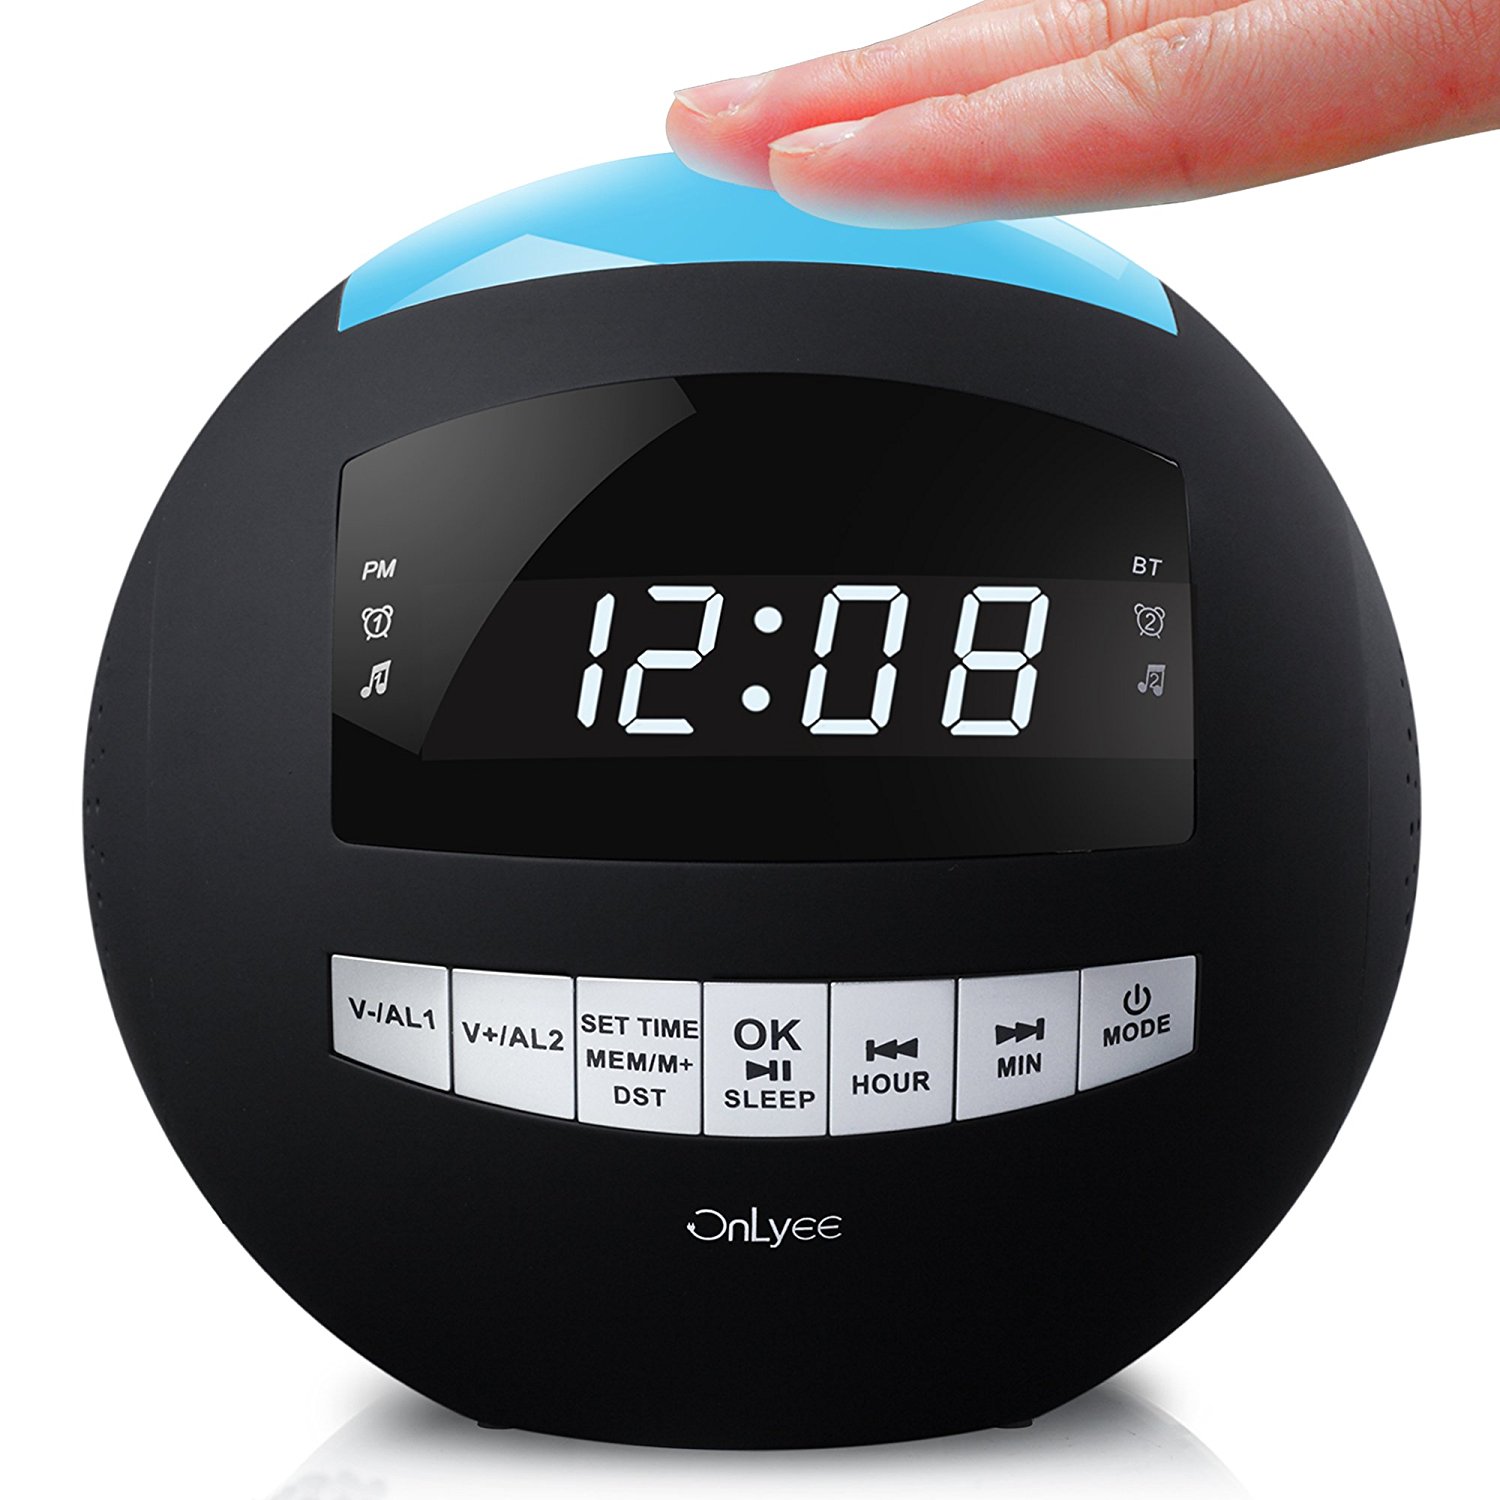 OnLyee Digital Dimmable Alarm Clock Radio & Wireless Bluetooth Speaker with AM FM,AUX,Dual USB Charging,Multi-Color LED Night Light